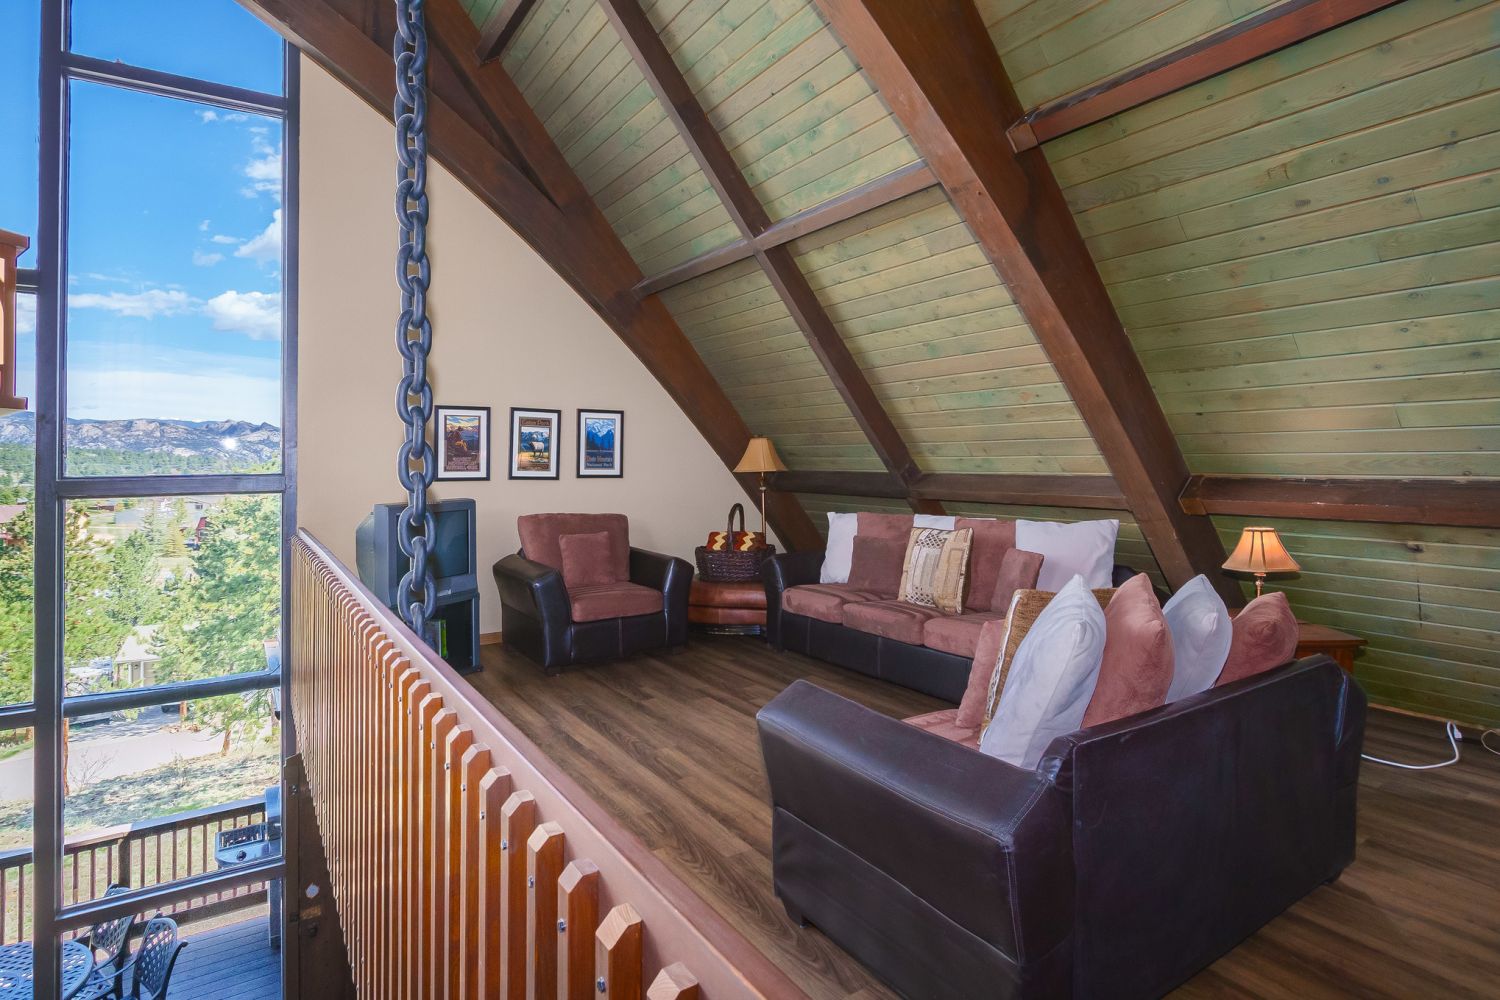 Sky View in the Rockies - Loft with a sitting area with a couch, loveseat and a TV